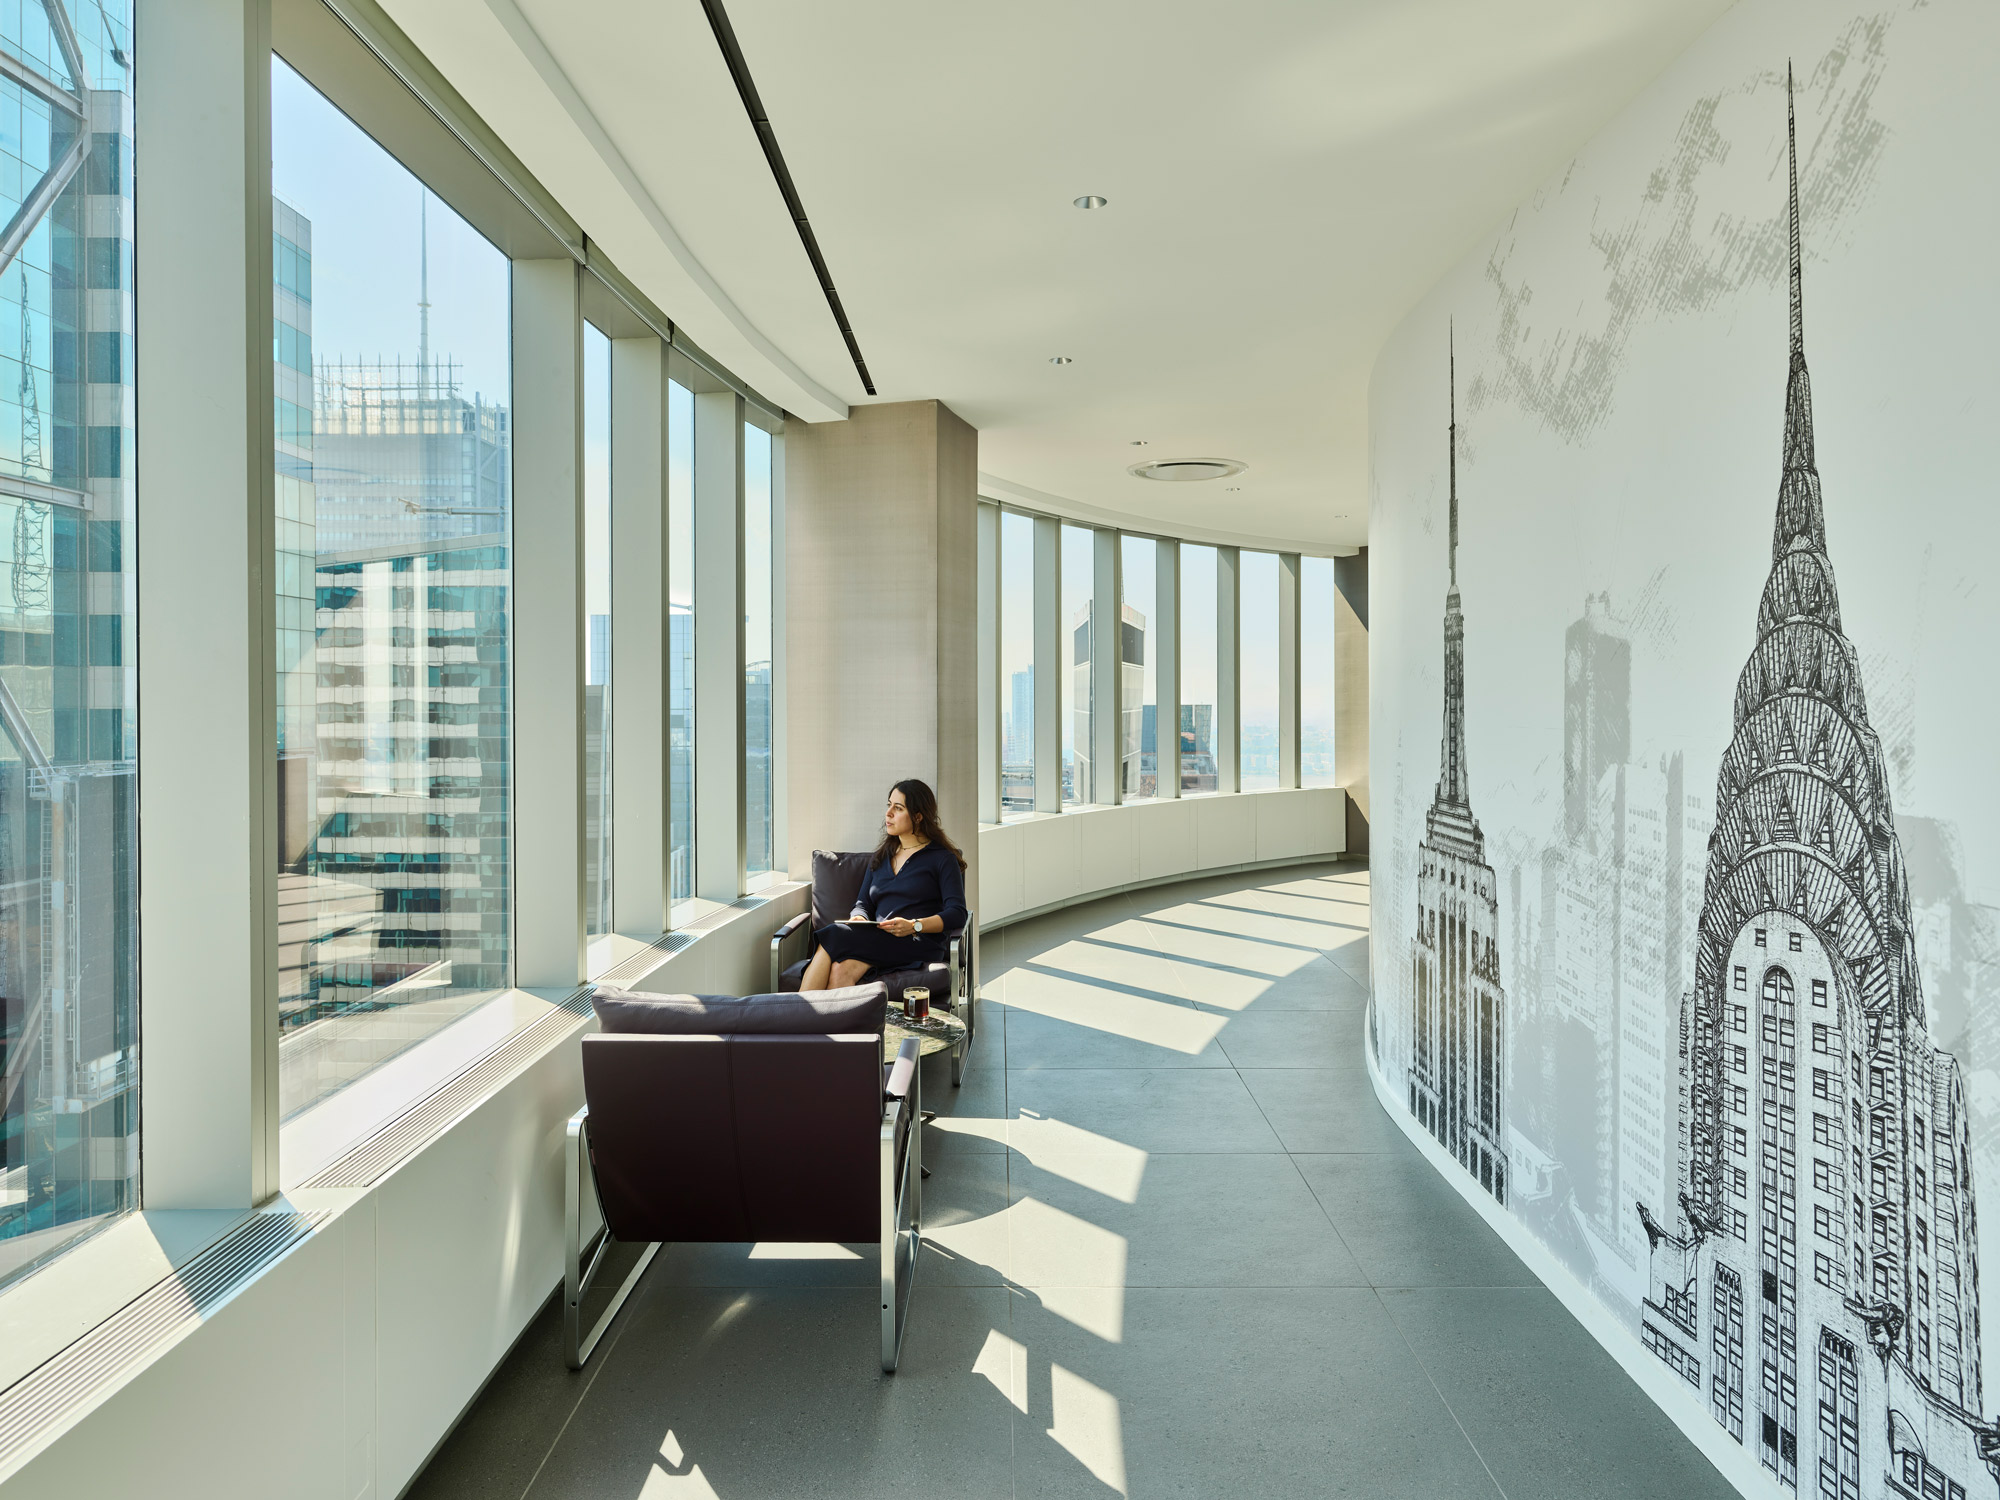 An open office corridor with a seating nook, a large mural of a cityscape, and an employee enjoying the view.